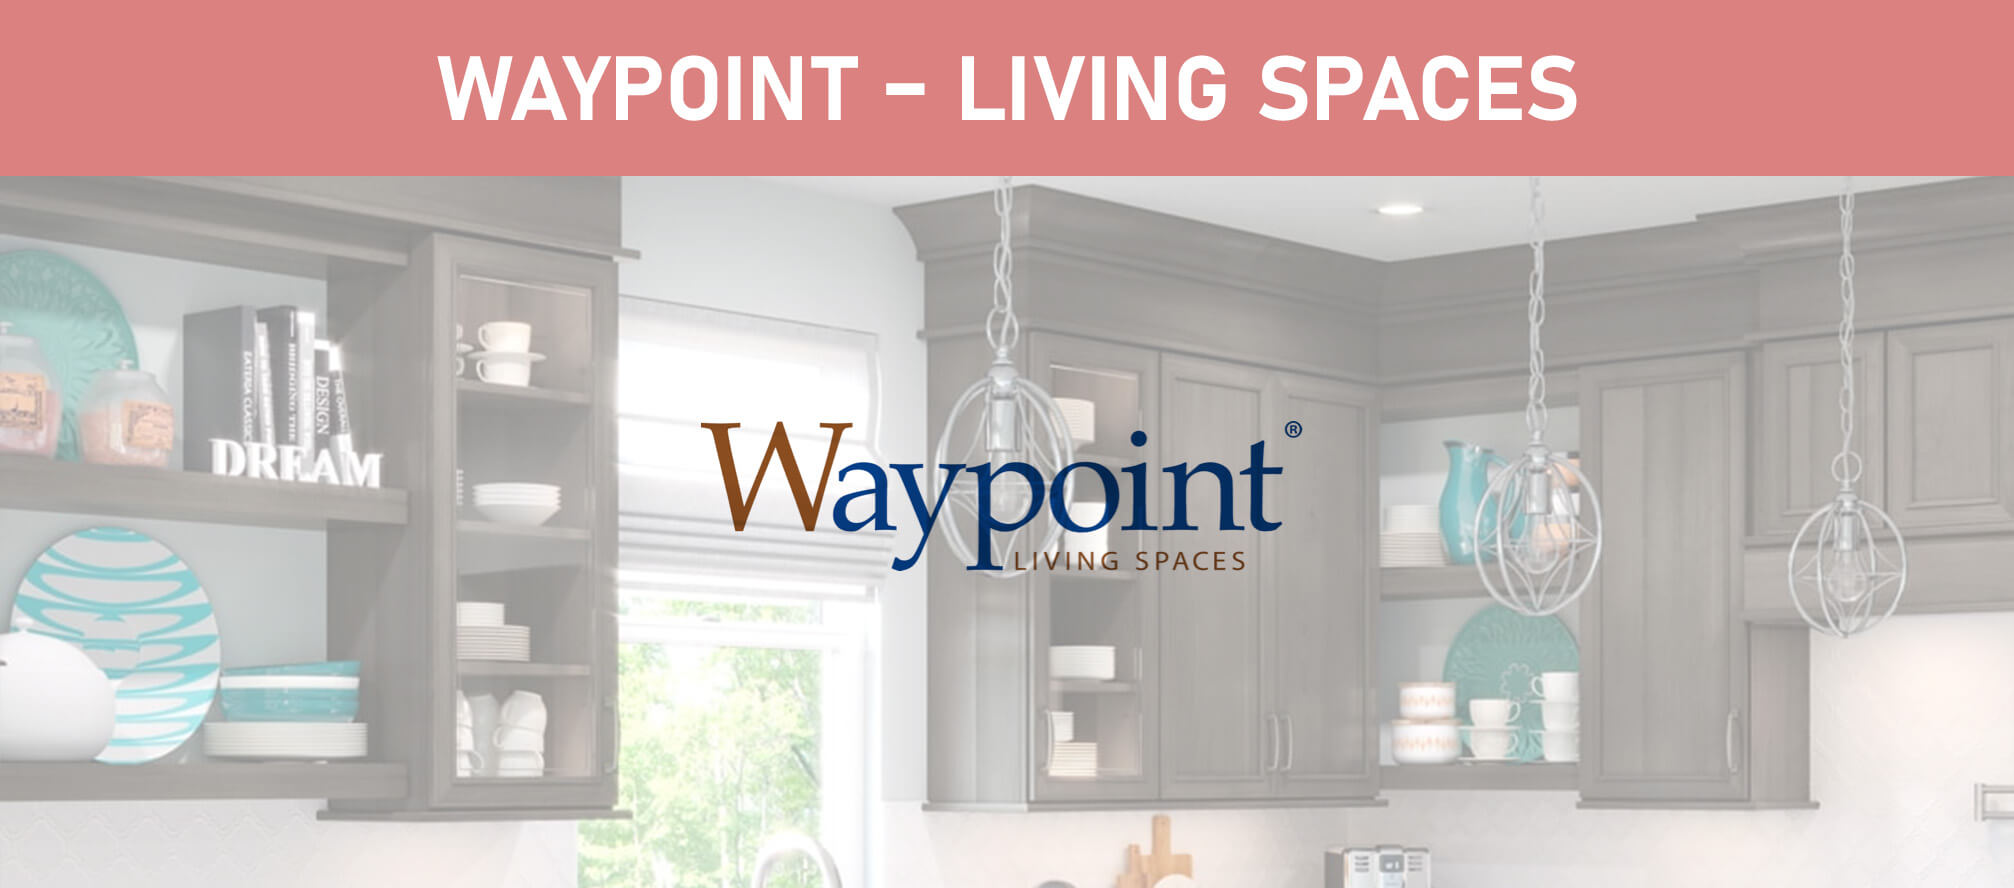 Waypoint – Living Spaces Featured image